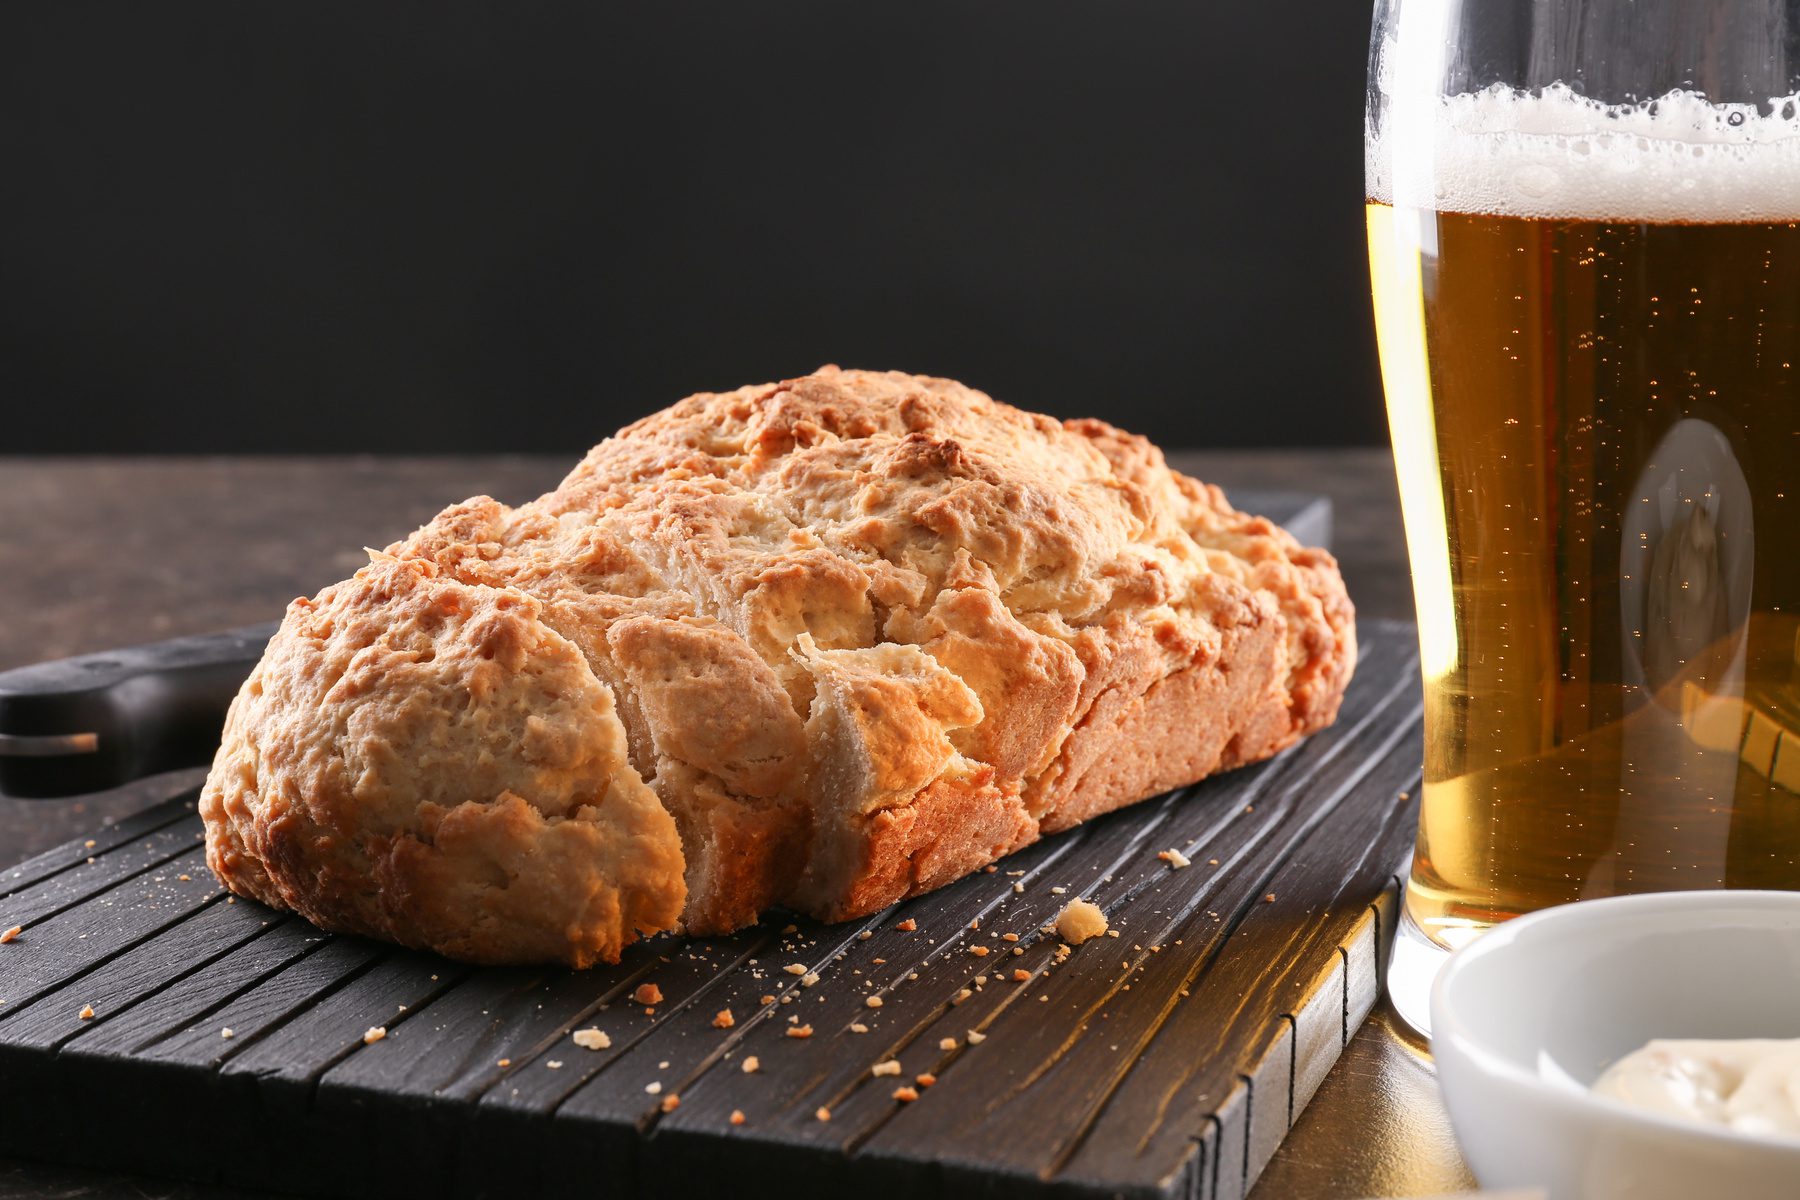 Beer Bread and a pint of beer